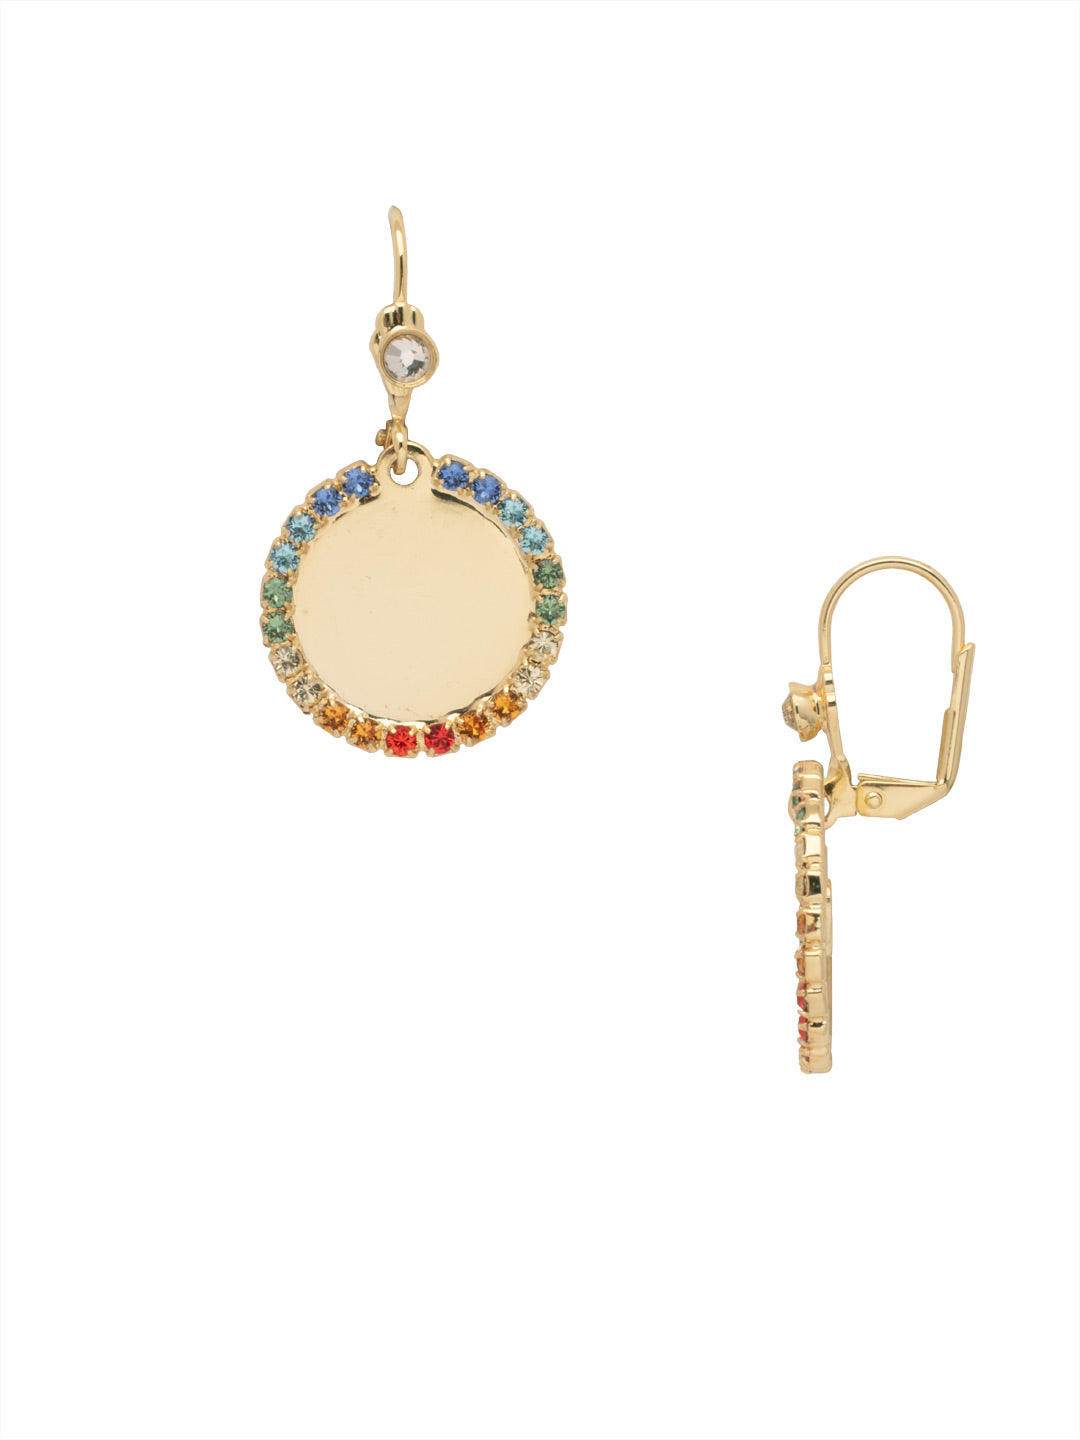 Medallion Dangle Earrings - 8EA3BGPRI - <p>The Medallion Dangle Earrings feature a metal disk embellished with crystals around the edges. From Sorrelli's Prism collection in our Bright Gold-tone finish.</p>